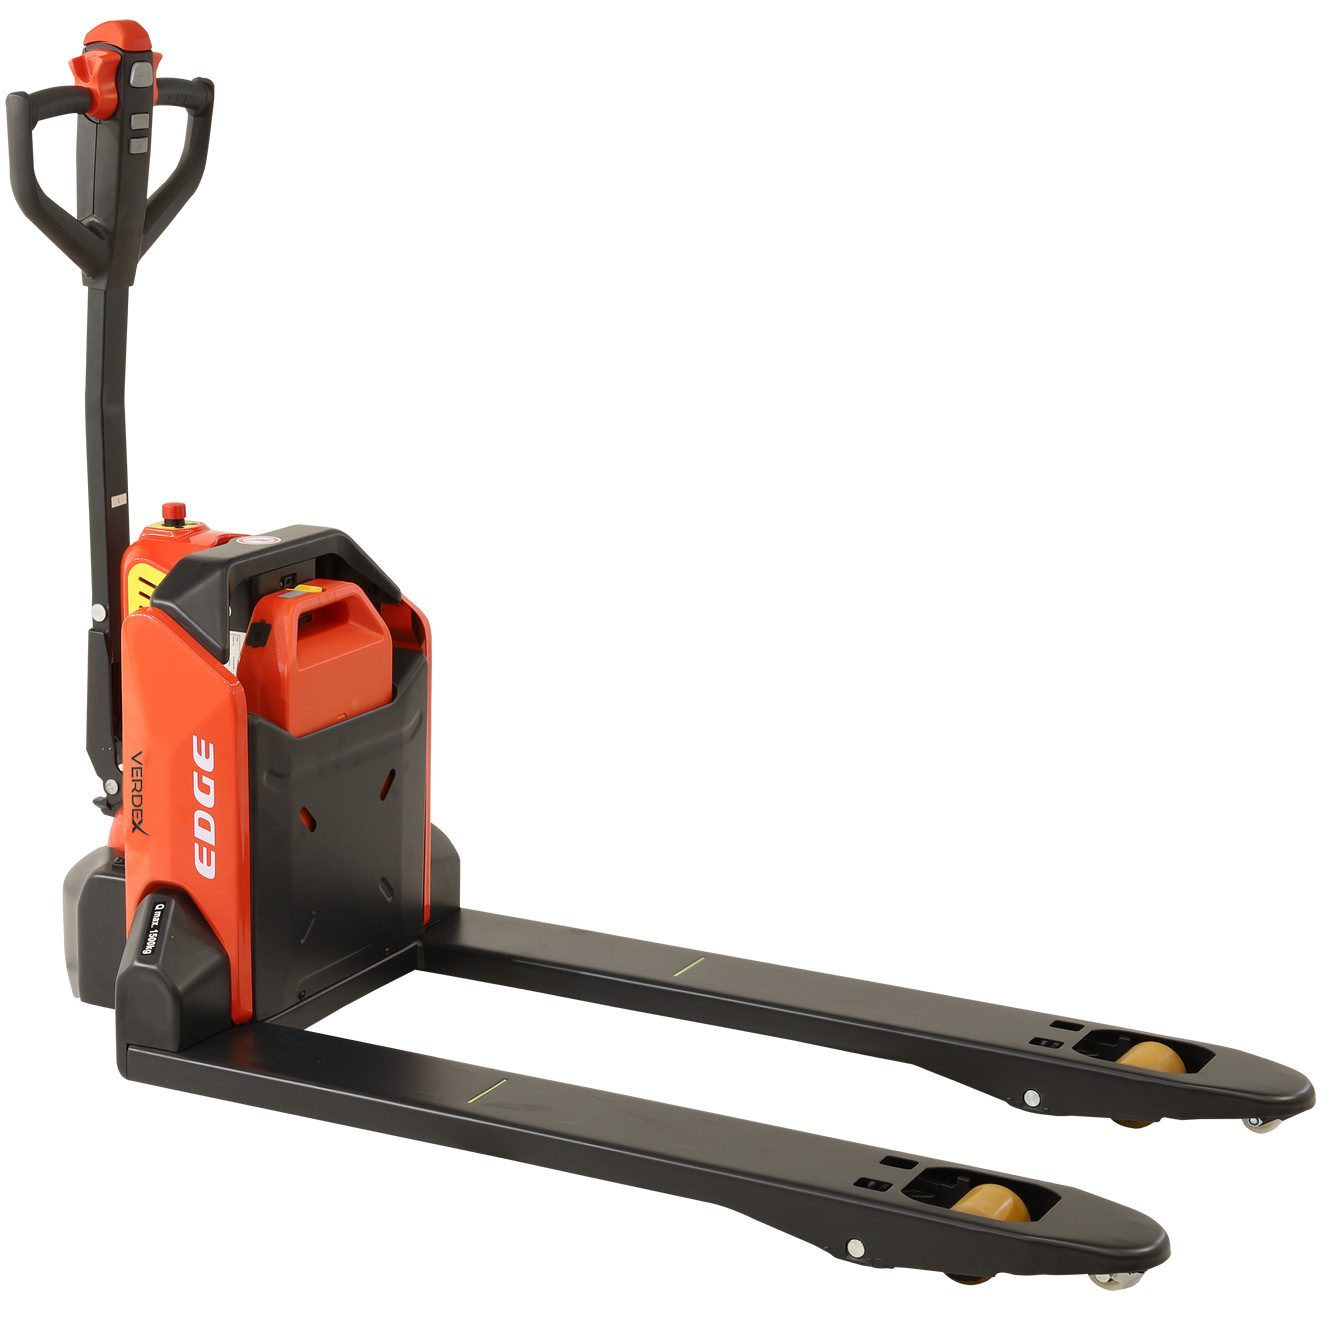 The Edge - Electric Pallet Truck 1500kg (supplied with 1 battery) - 685mm wide